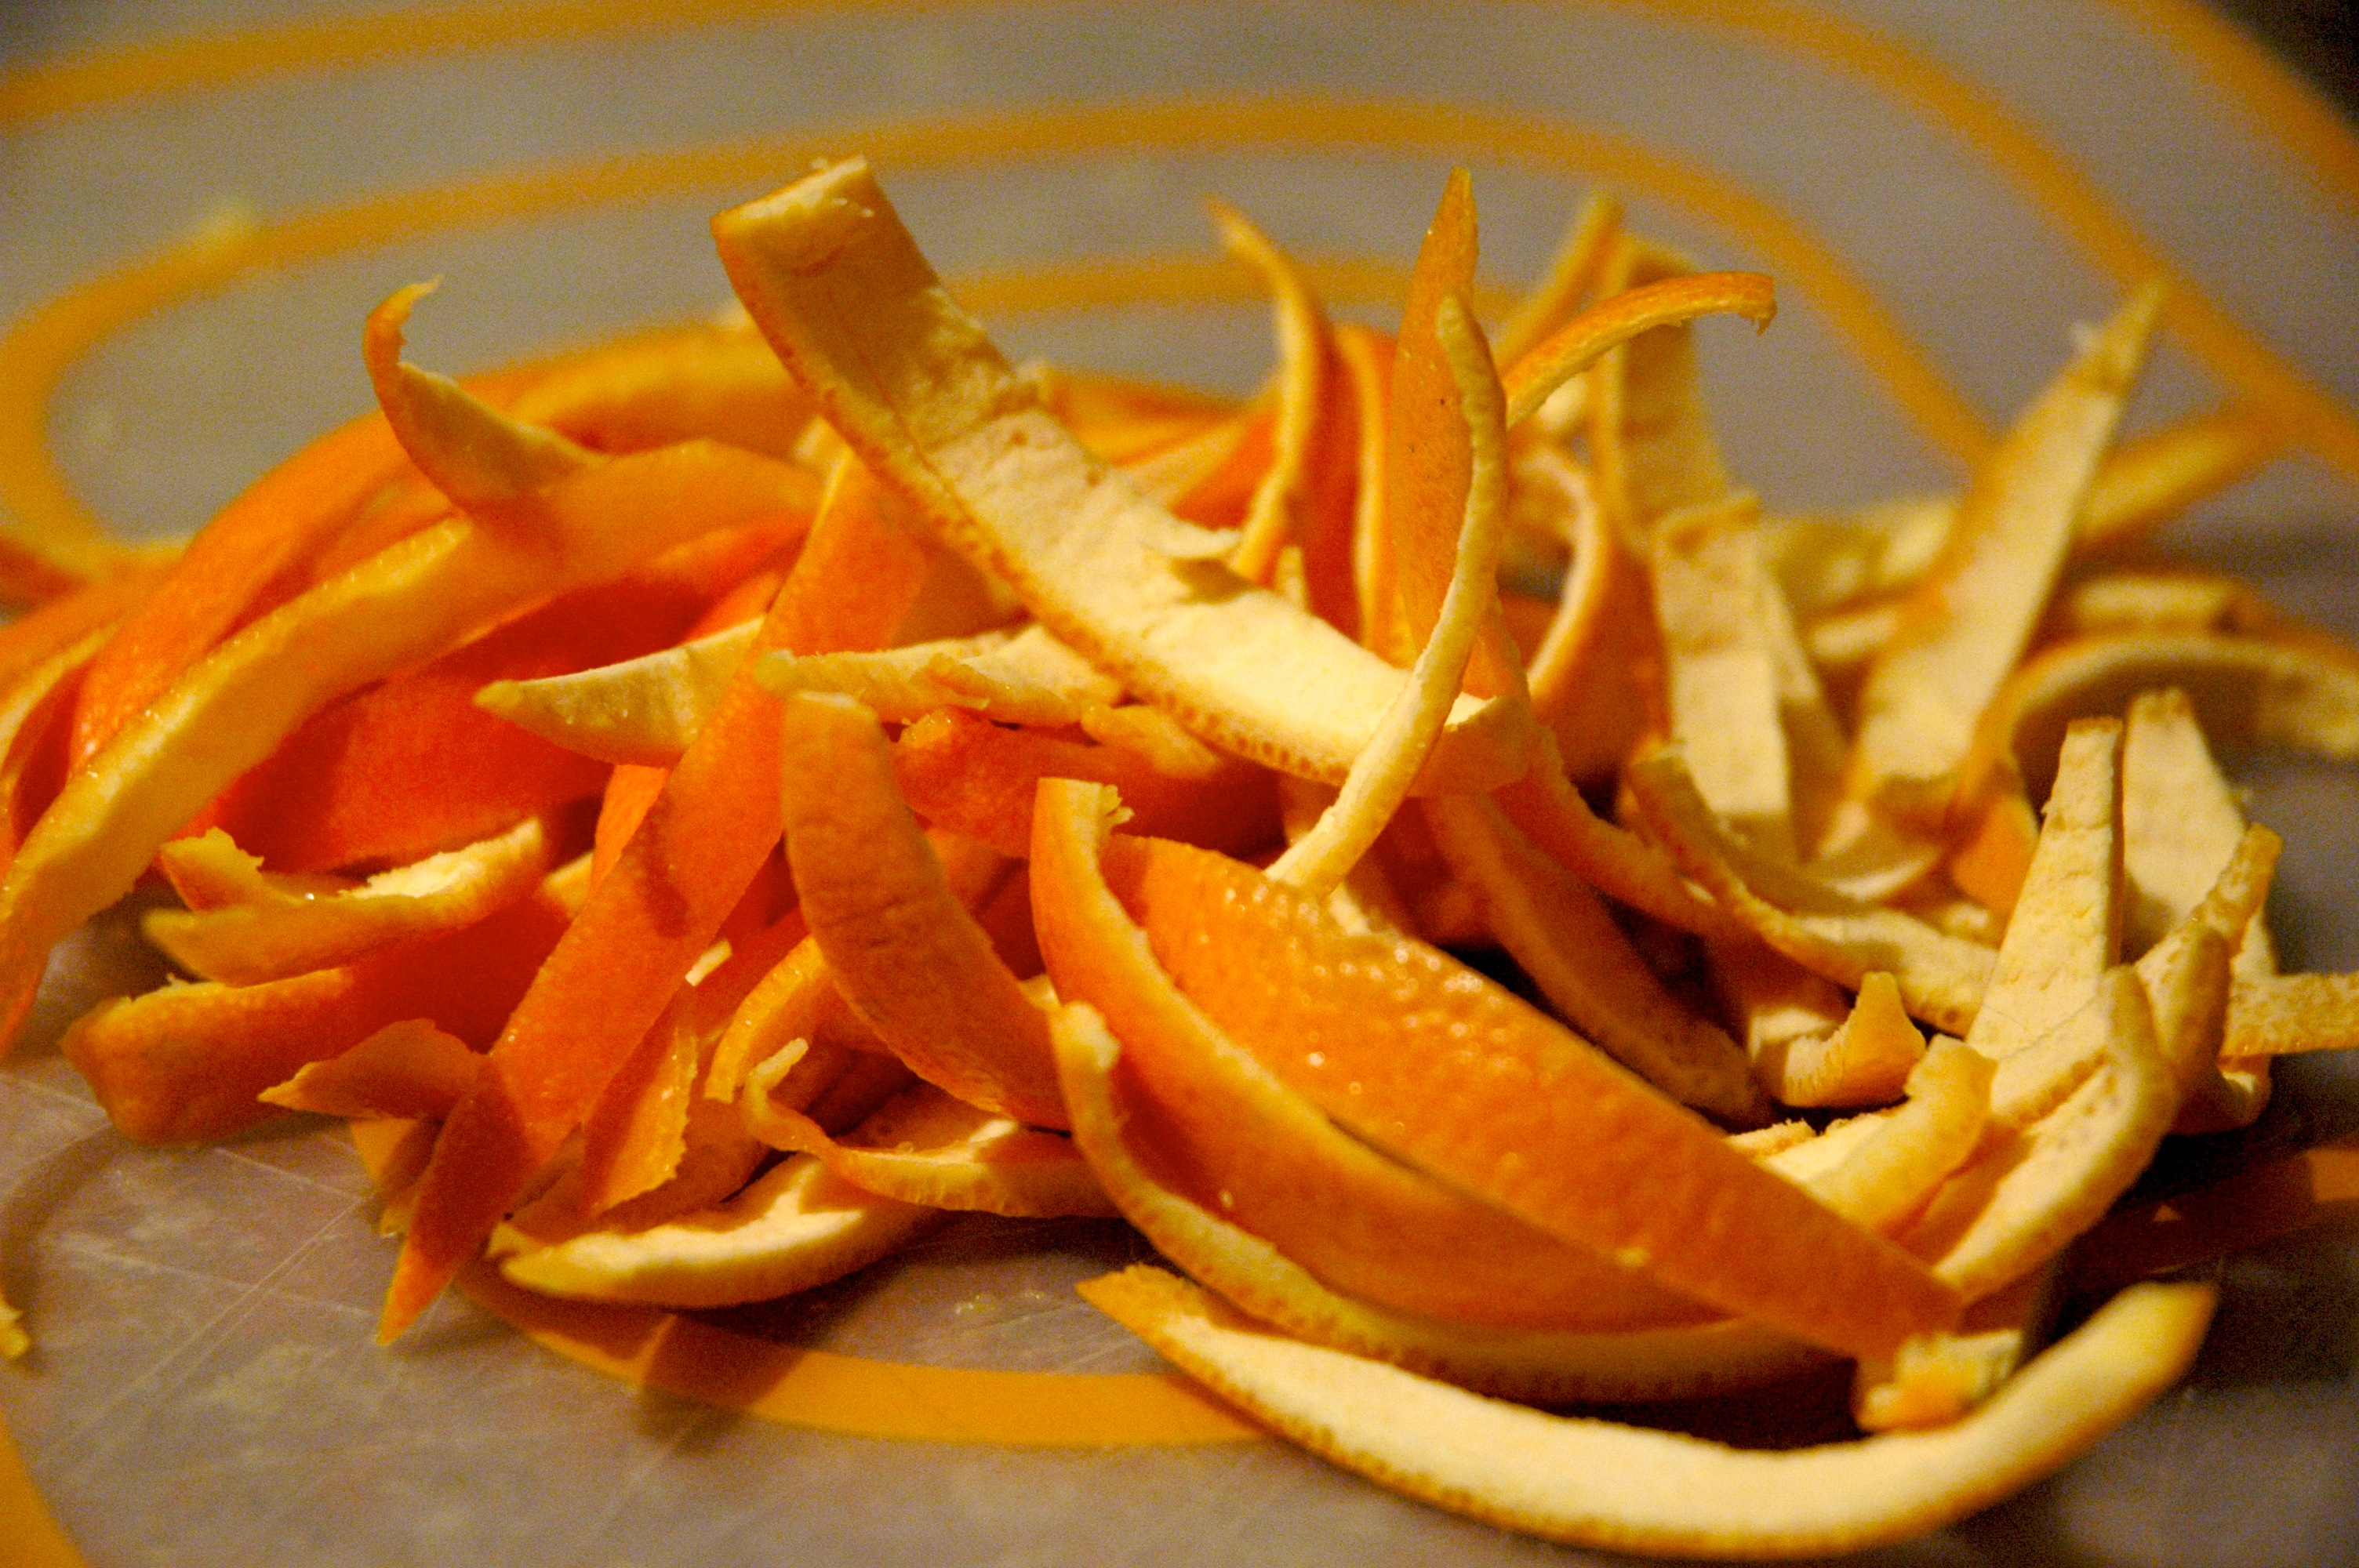 how to get rid of pimples overnight - Orange peels